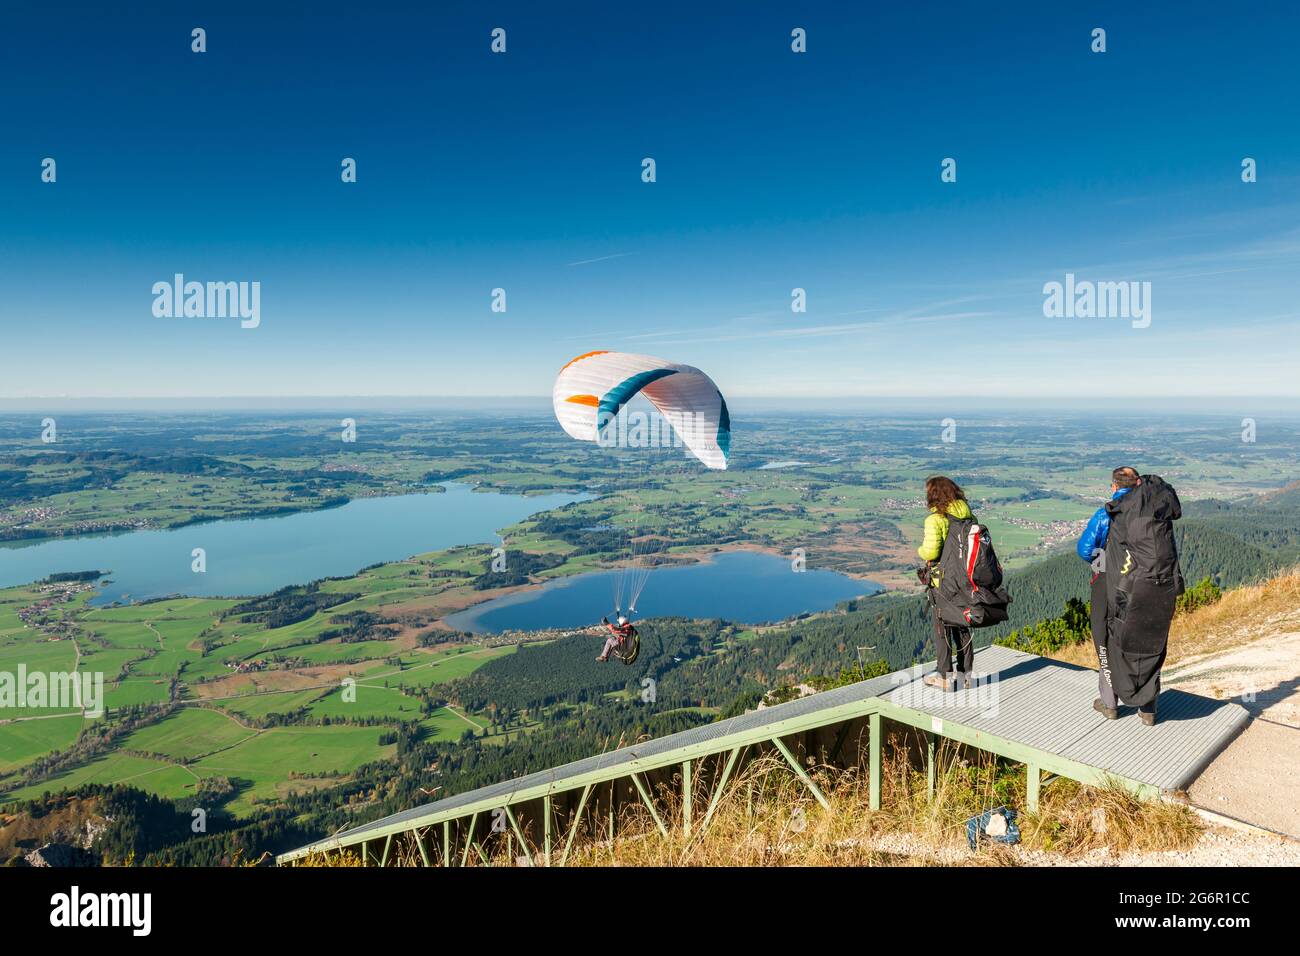 Schwangau, Germany - October 11, 2017: Paragliders starting on the Tegelberg at the jump point with other athletes standing next to them. Stock Photo